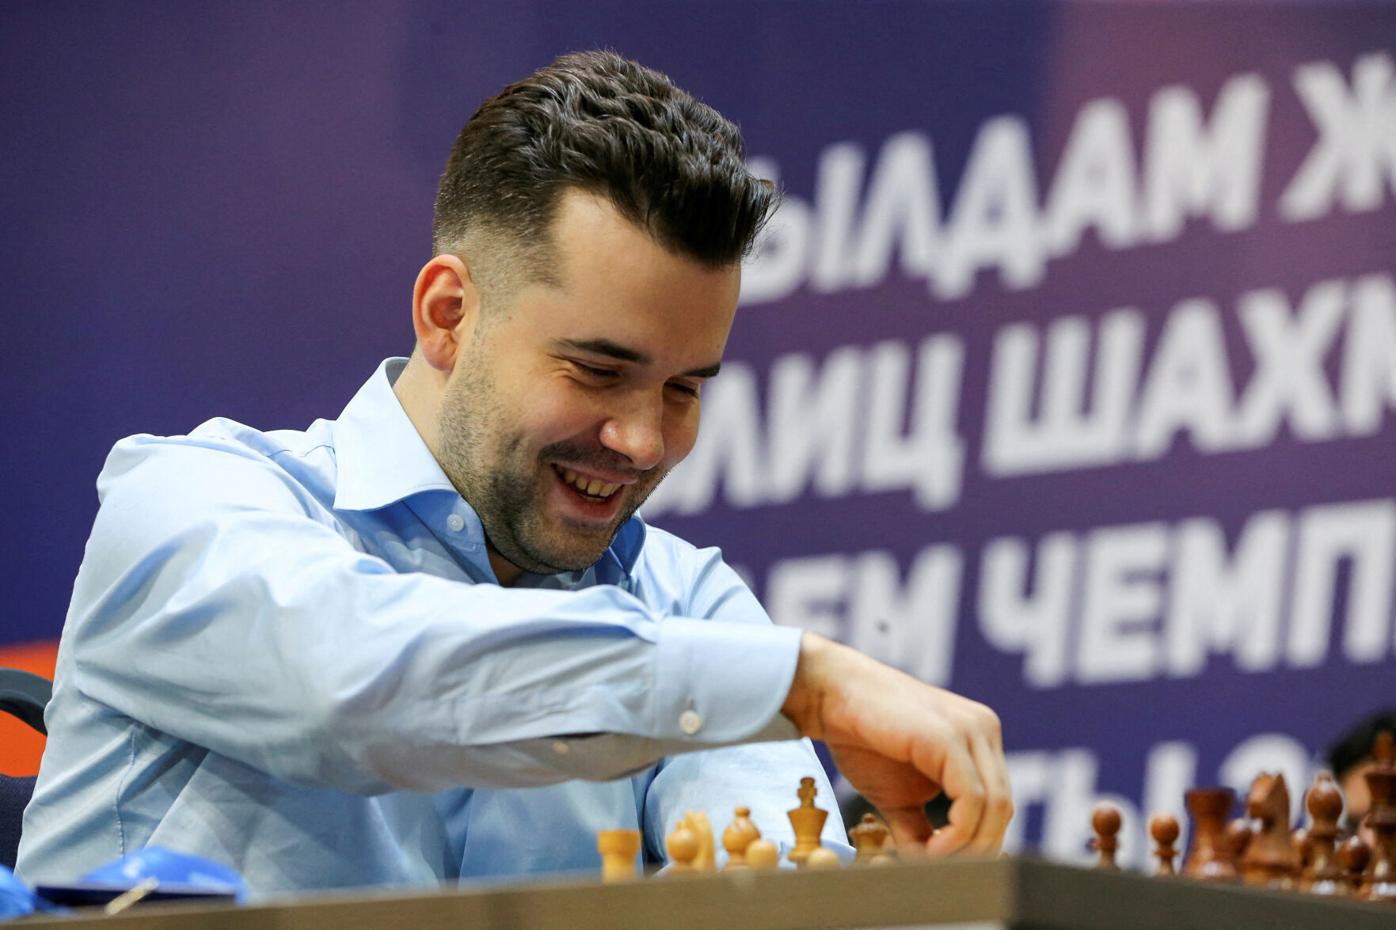 Russia's Ian Nepo Nepomniachtchi edges Norway's Magnus Carlsen, wins the  World Chess Championship!